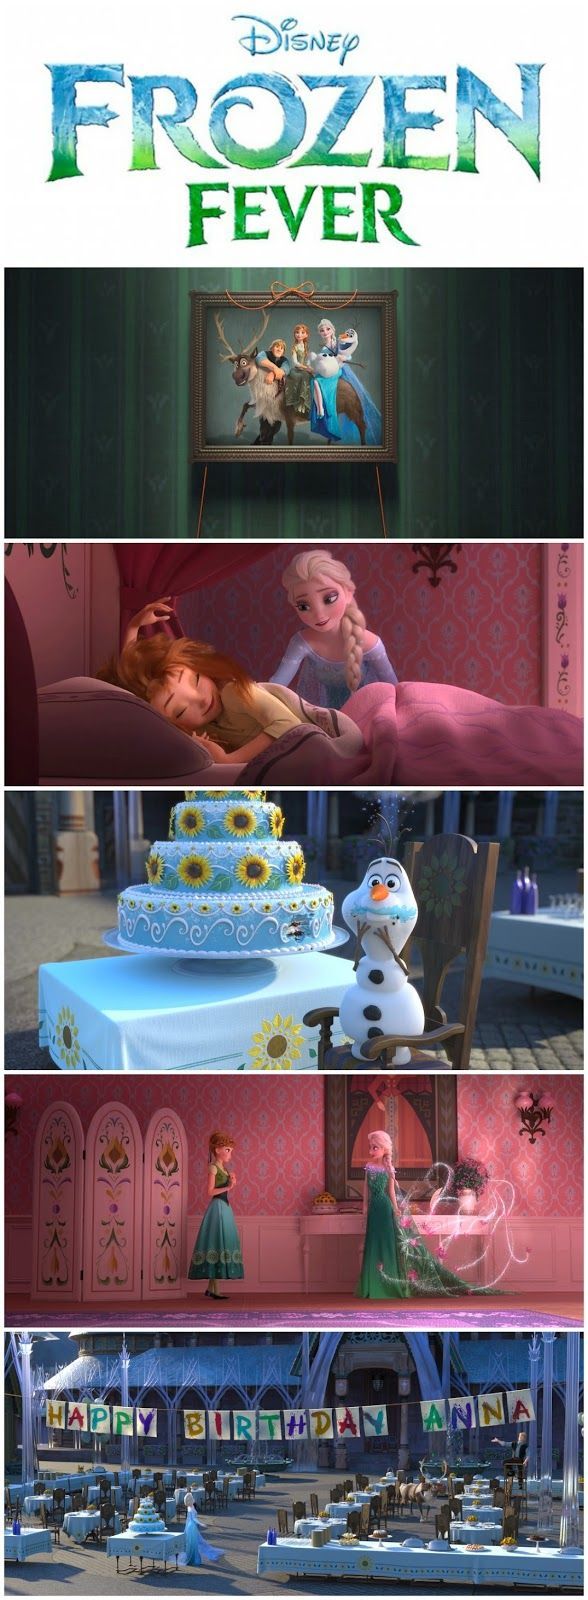 A look at images from the main scenes in Disneys Frozen Fever. This is a short, not the full sequel movie. Frozen 2 has (finally) been confirmed to be coming